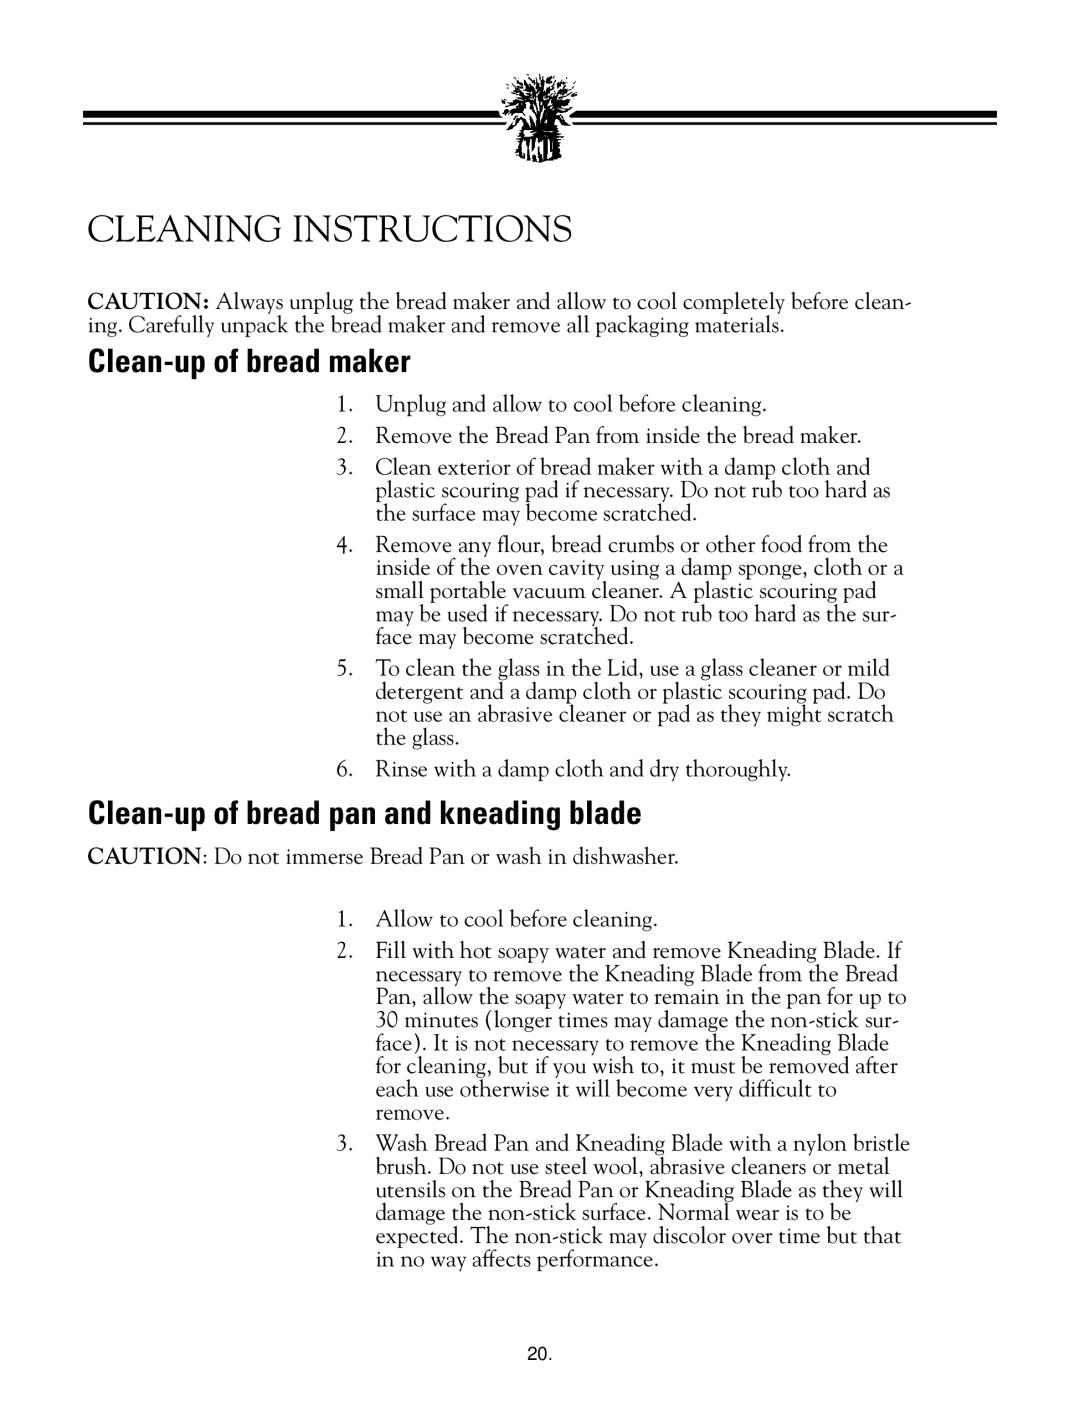 Breadman TR888 instruction manual Cleaning Instructions, Clean-up of bread maker, Clean-up of bread pan and kneading blade 